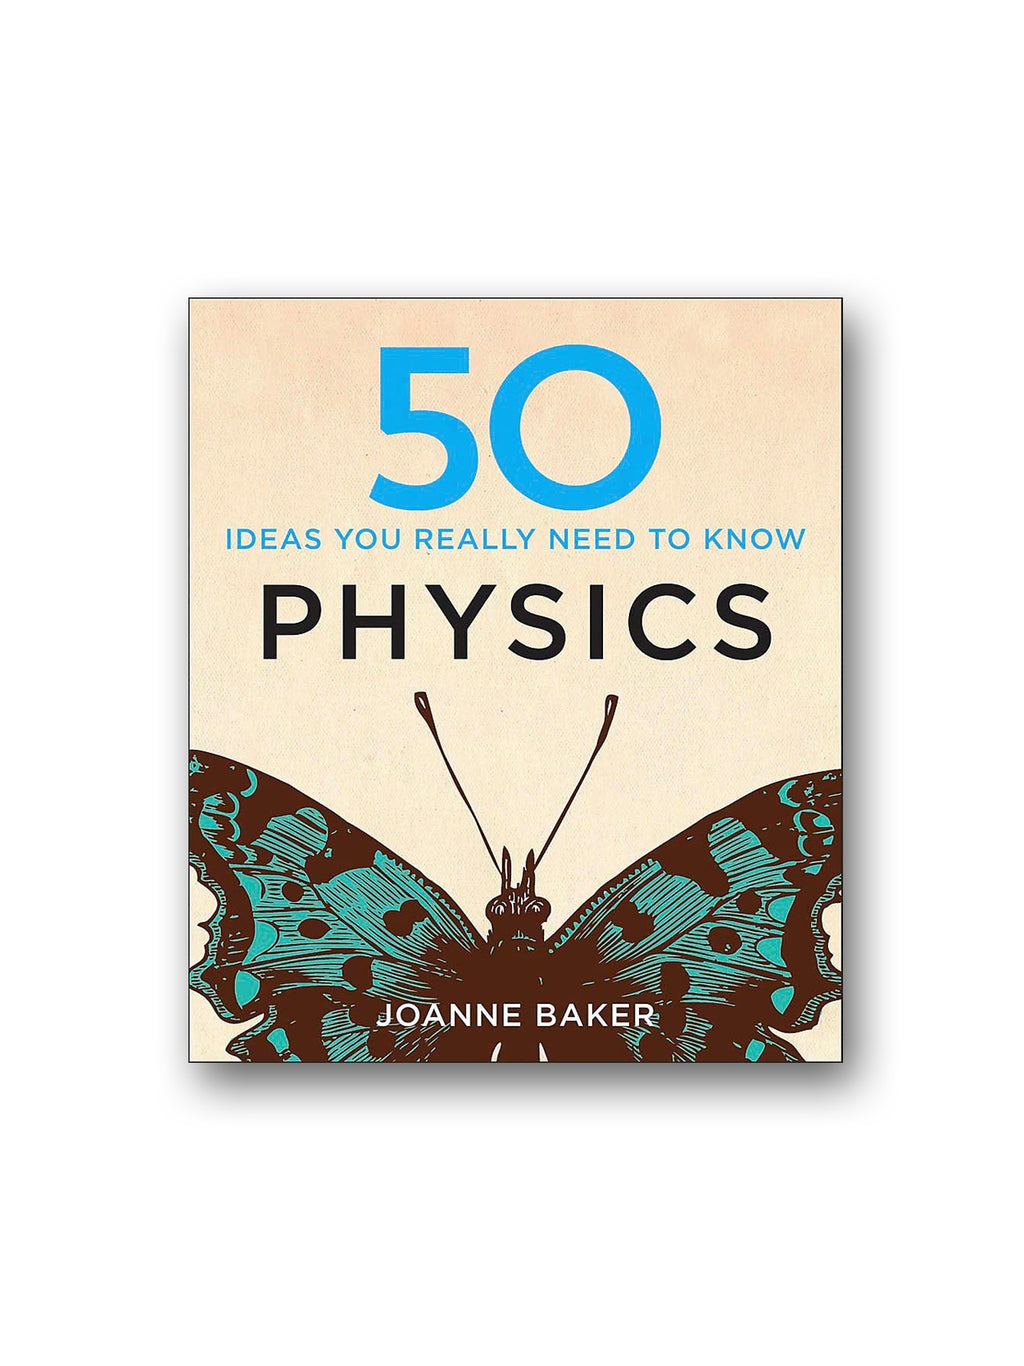 50 Physics Ideas You Really Need to Know